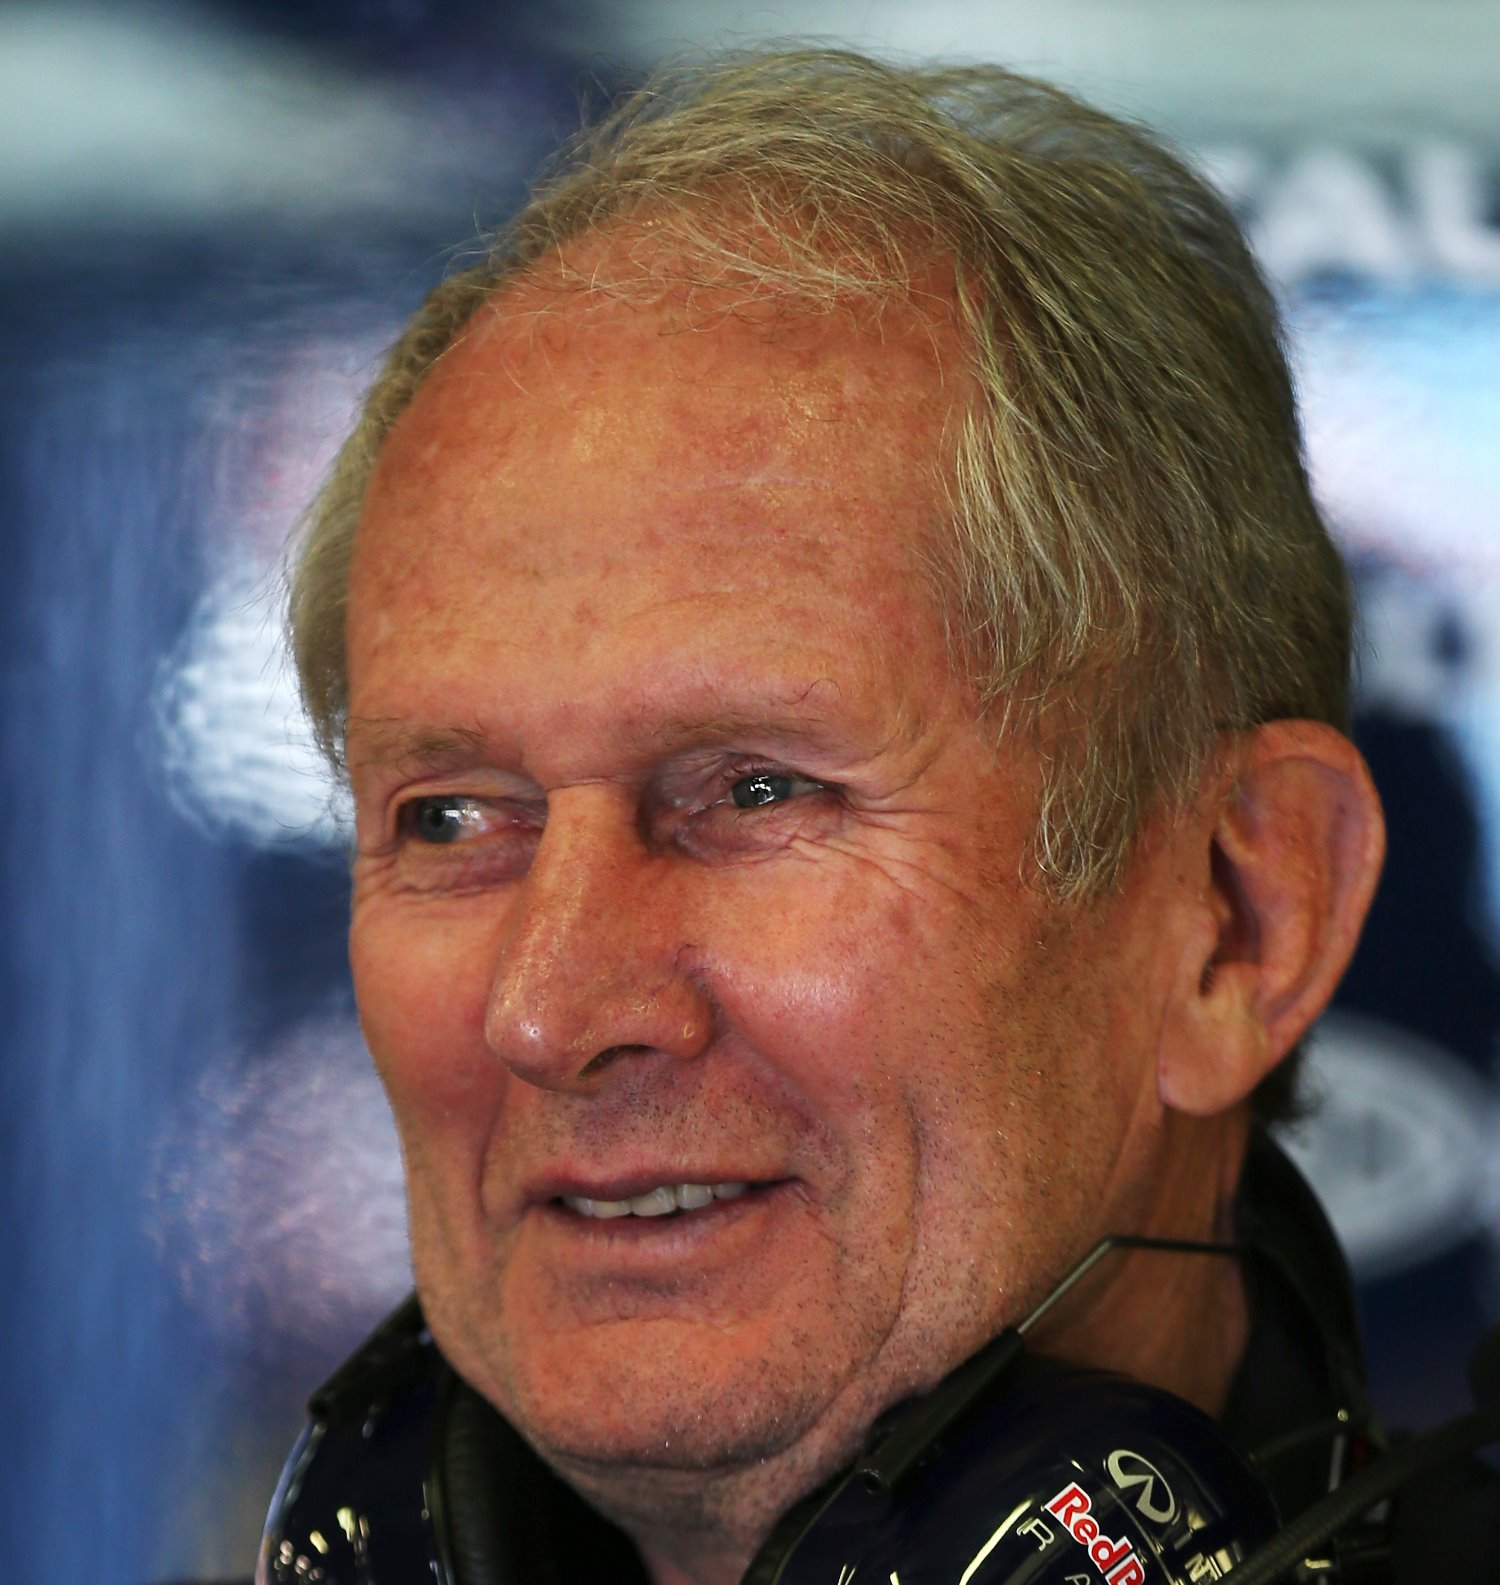 Helmut Marko is tired of Mercedes dominating